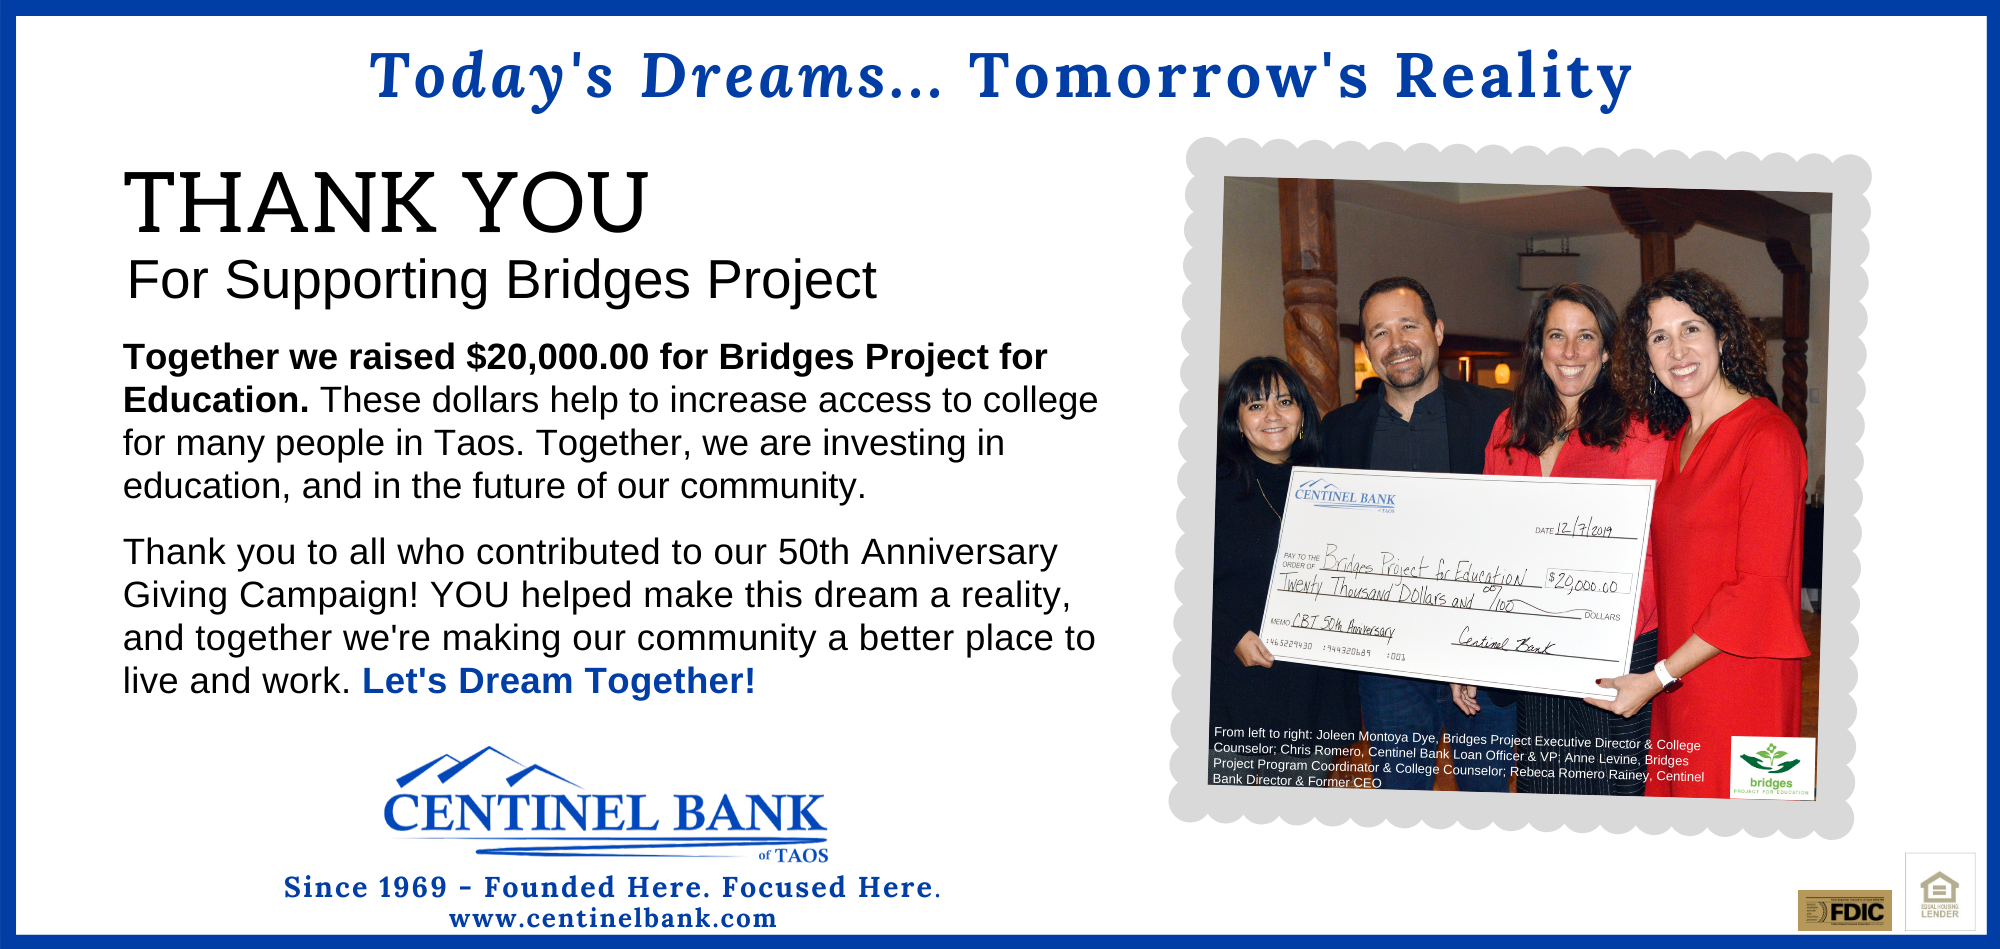 Thank you for supporting Bridges Project